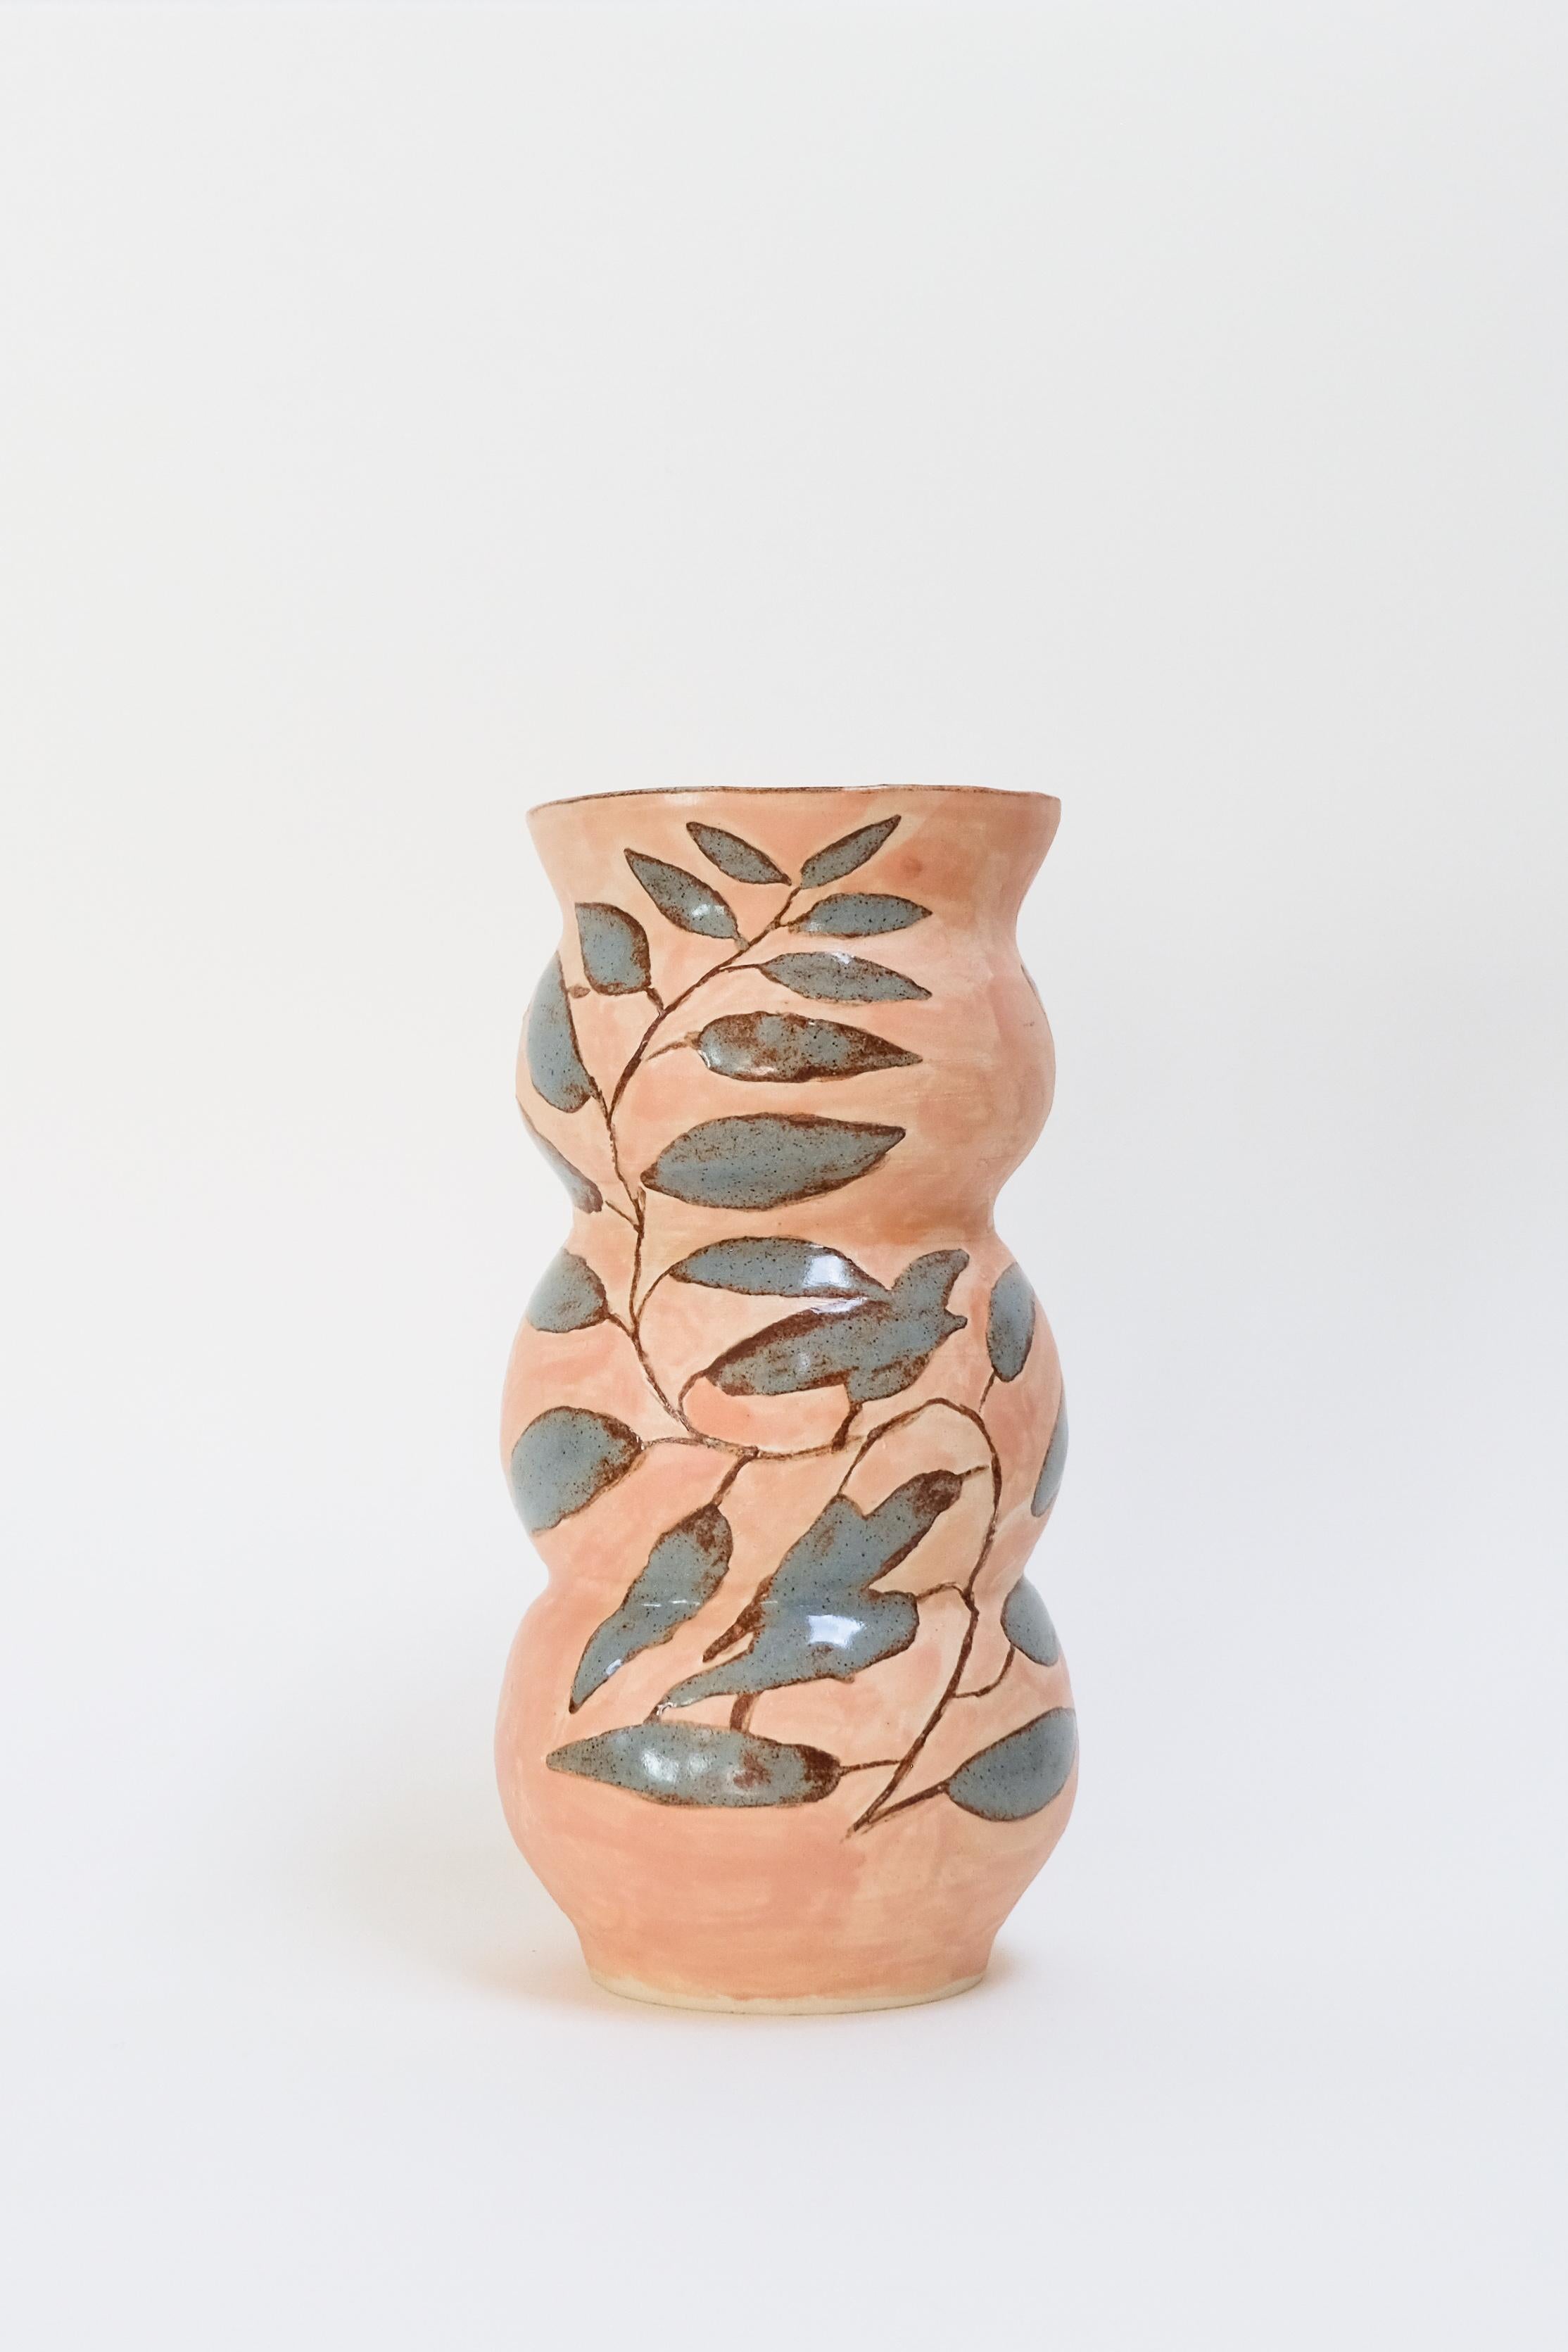 This warm contemporary botanical ceramic vase features a unique bird design and is an original artwork by Canadian artist Misbah Ahmed. This piece from her collection of Mur vessels explores organic feminine forms with clay. Mur - meaning curve -